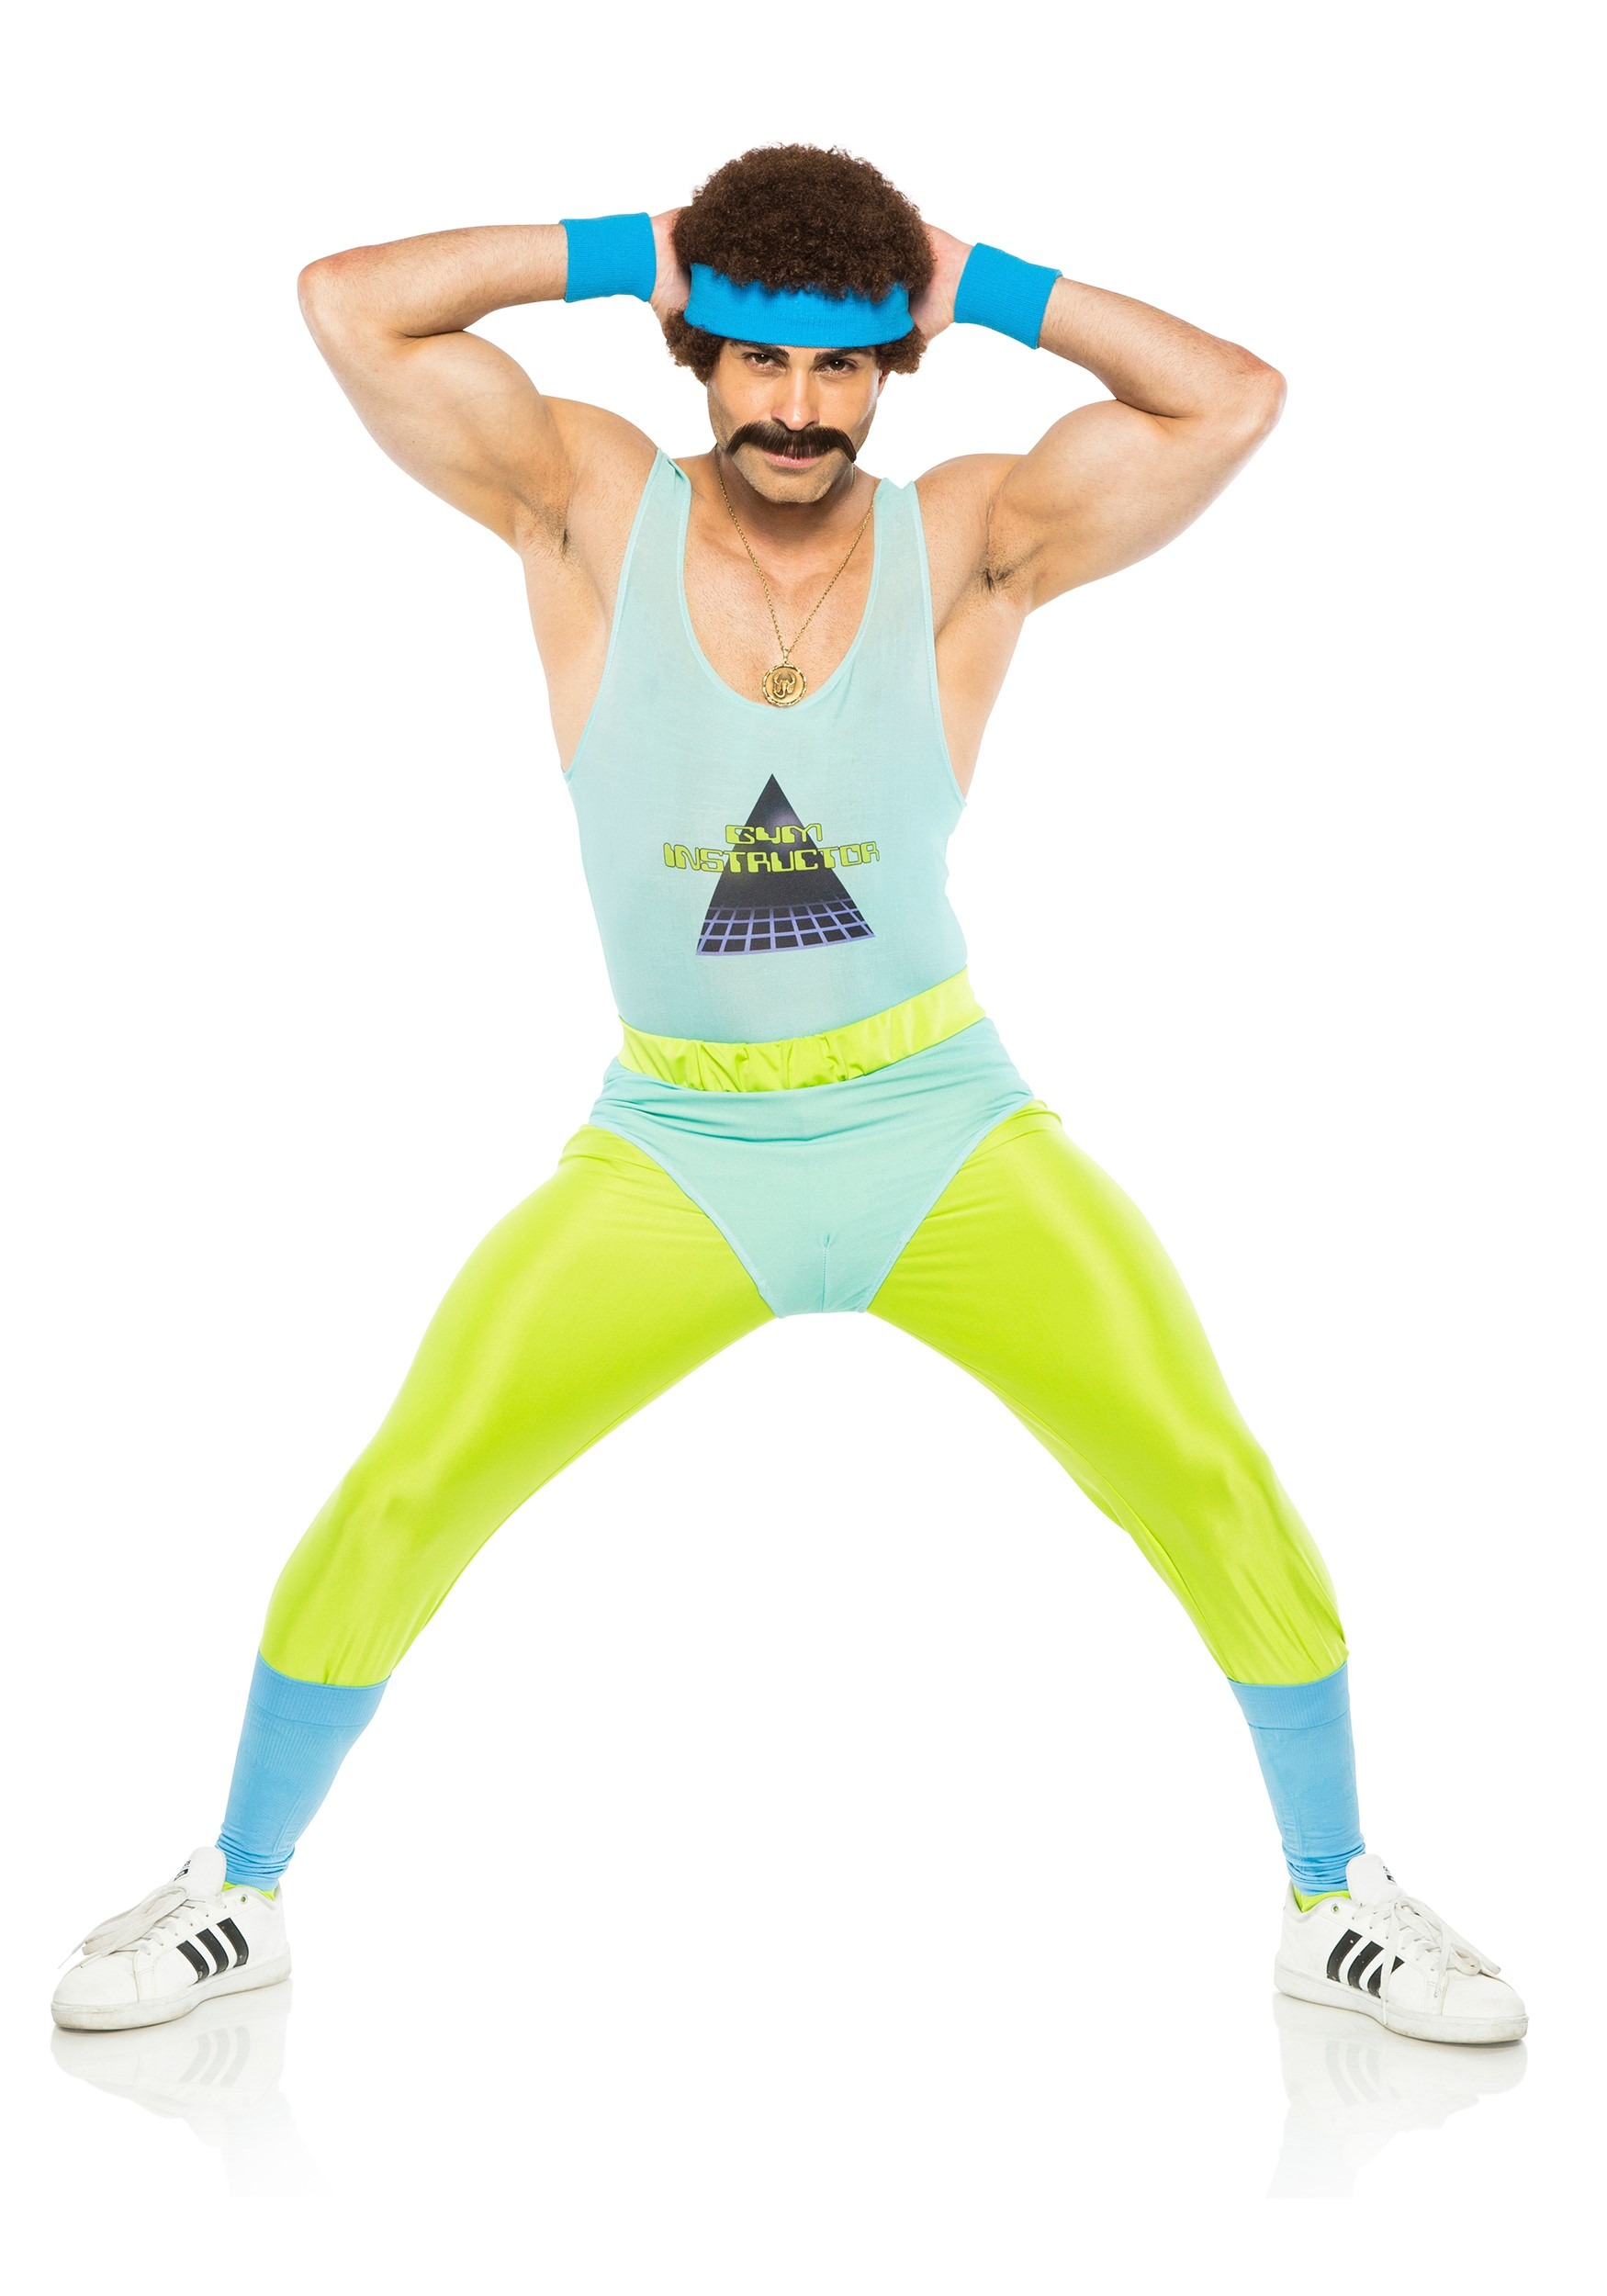 5 Day Male 80s workout clothes for push your ABS